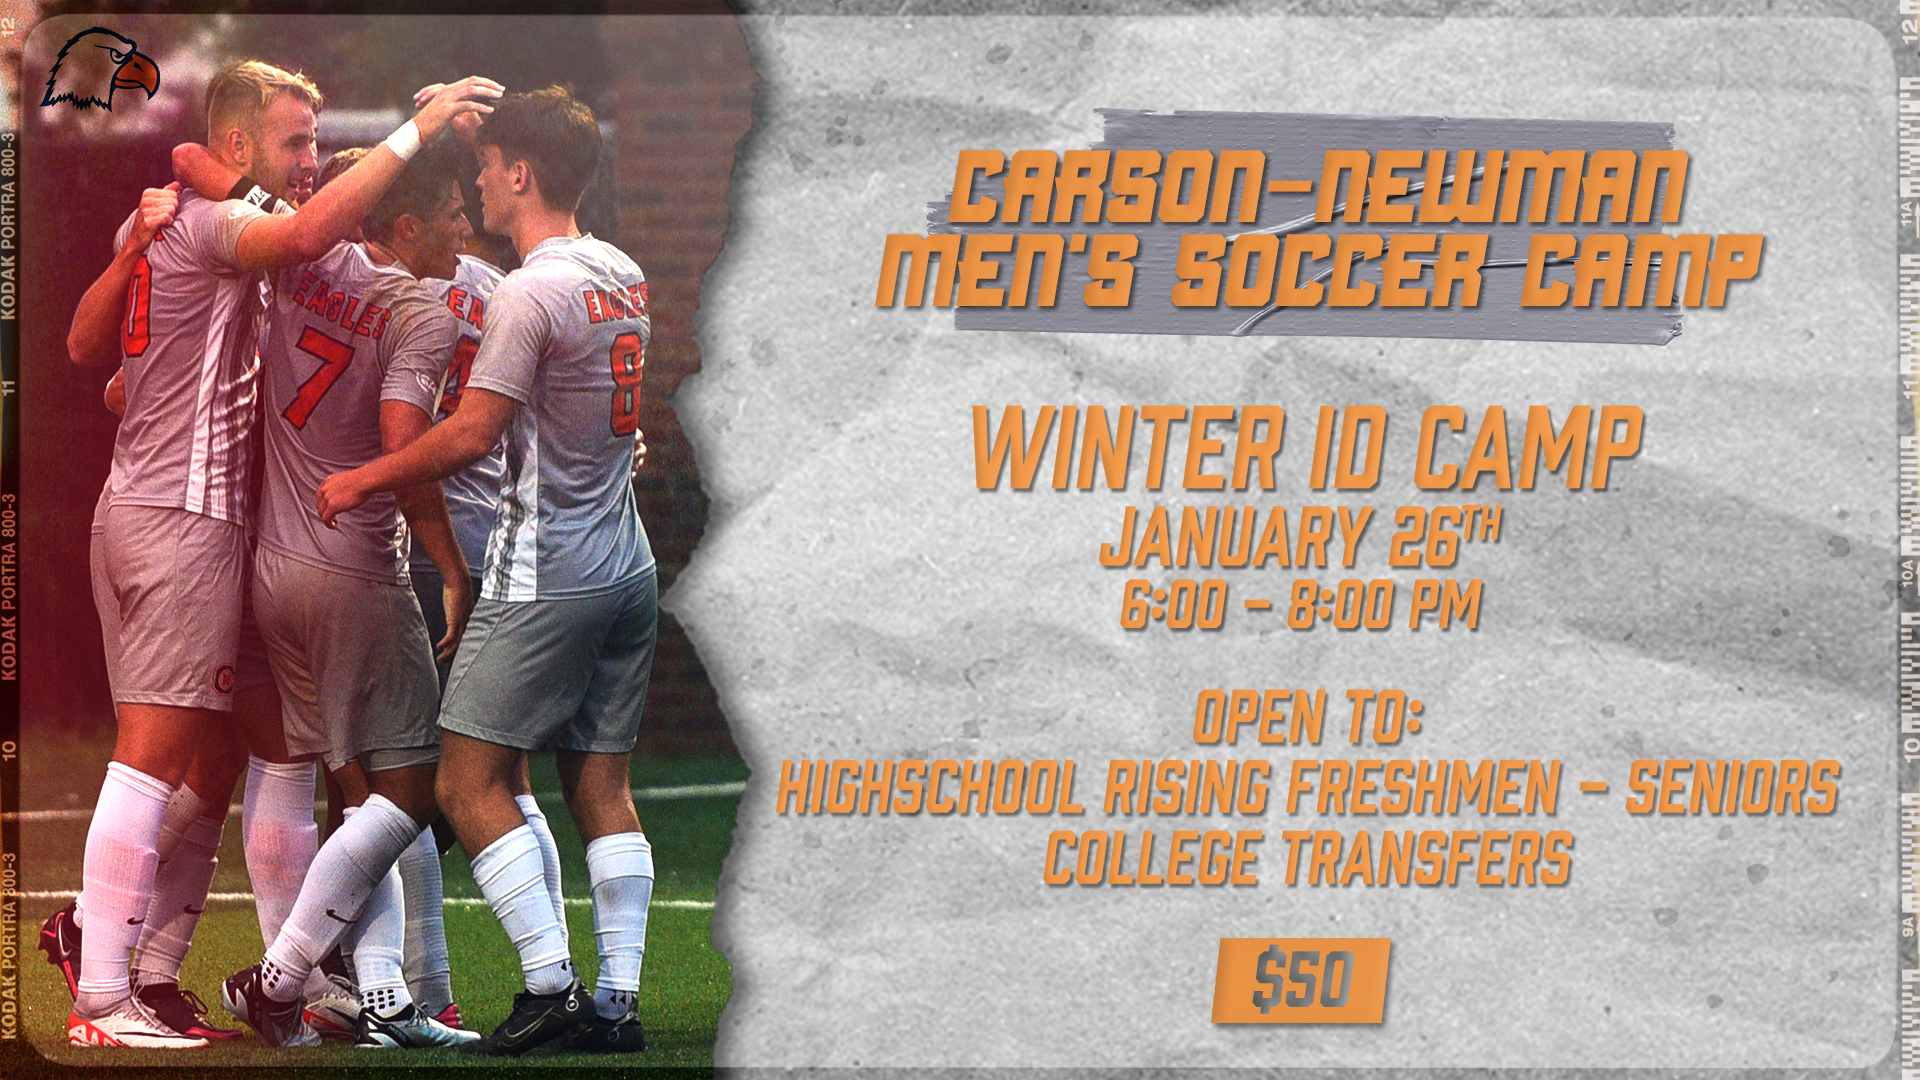 Men's Soccer I.D. Camp pushed back to January 26th